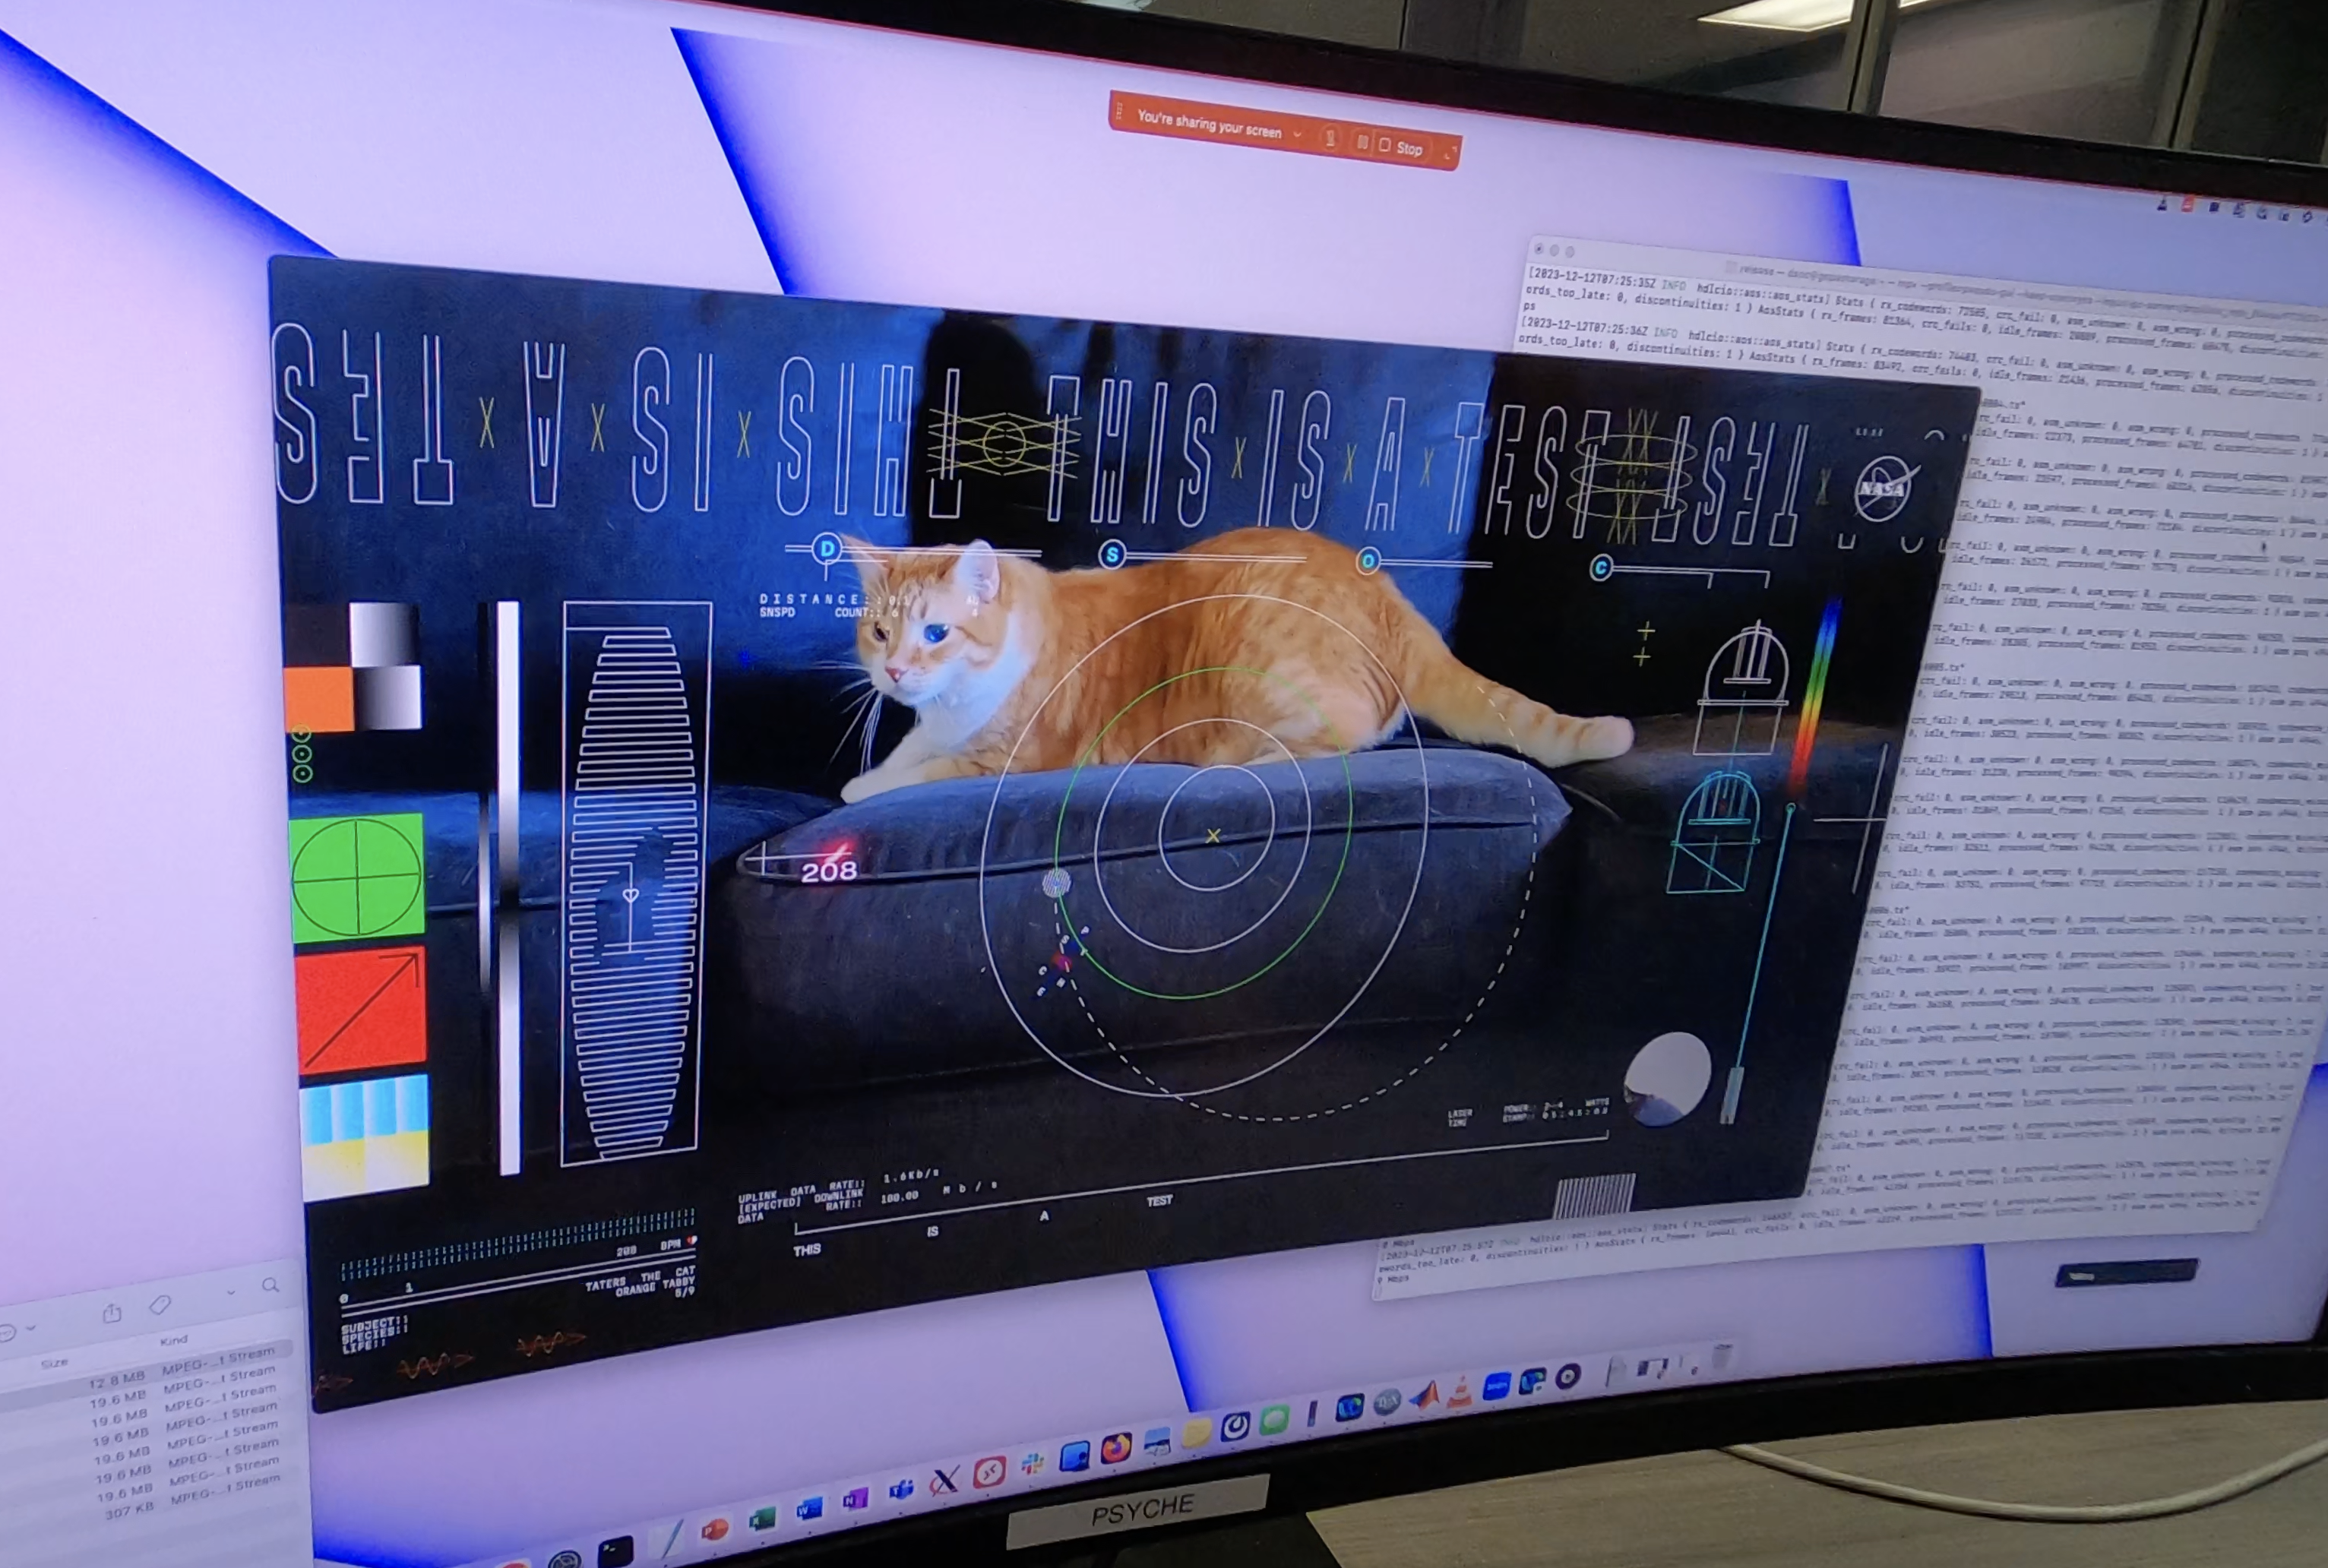 A computer screen in the mission support area shows Taters the cat in a still from the first high-definition streaming video to be sent via laser from deep space, as well as the incoming data stream delivering the frames from the video.